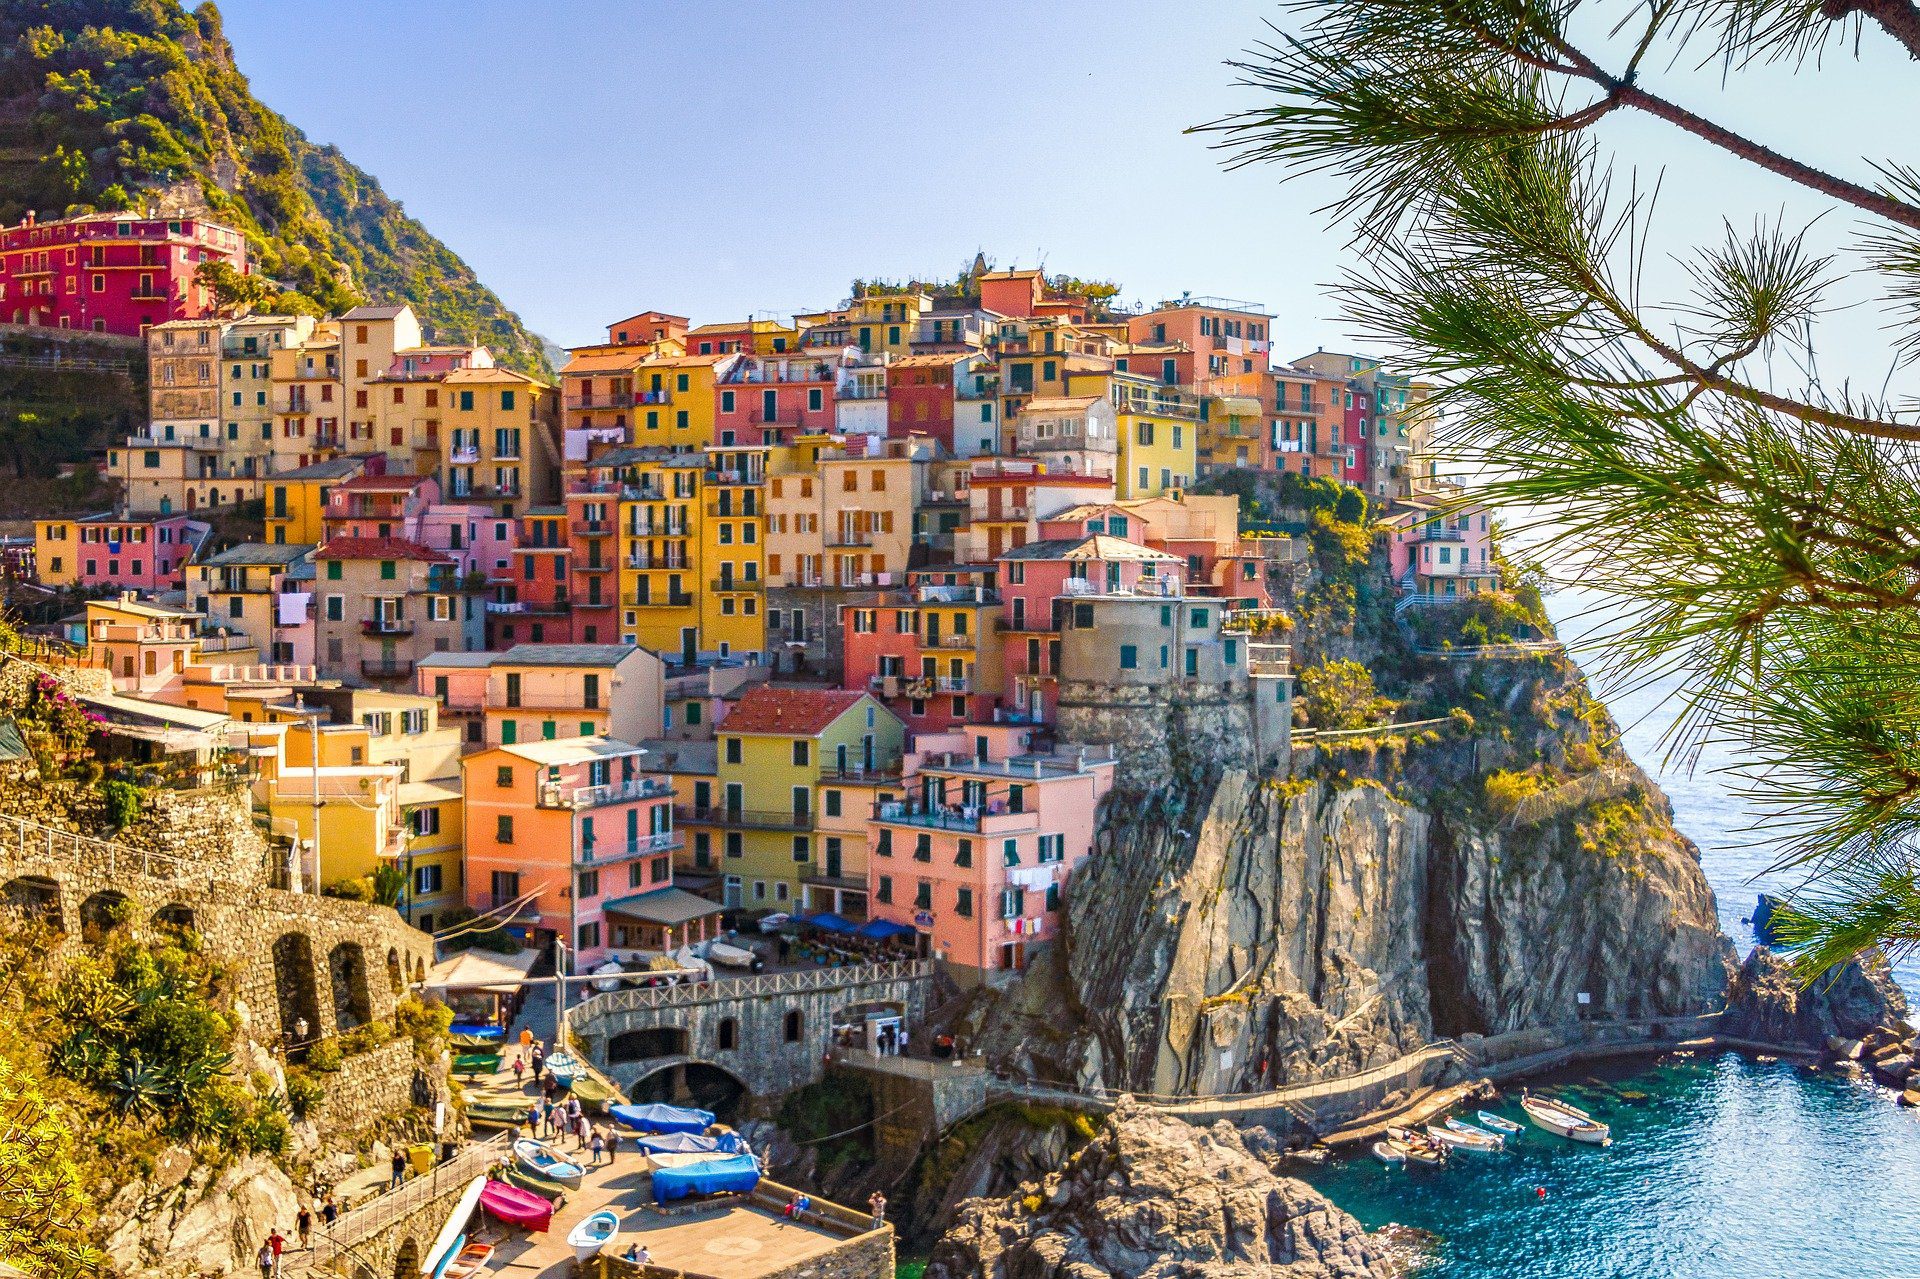 City in Italy built up on a cliff.